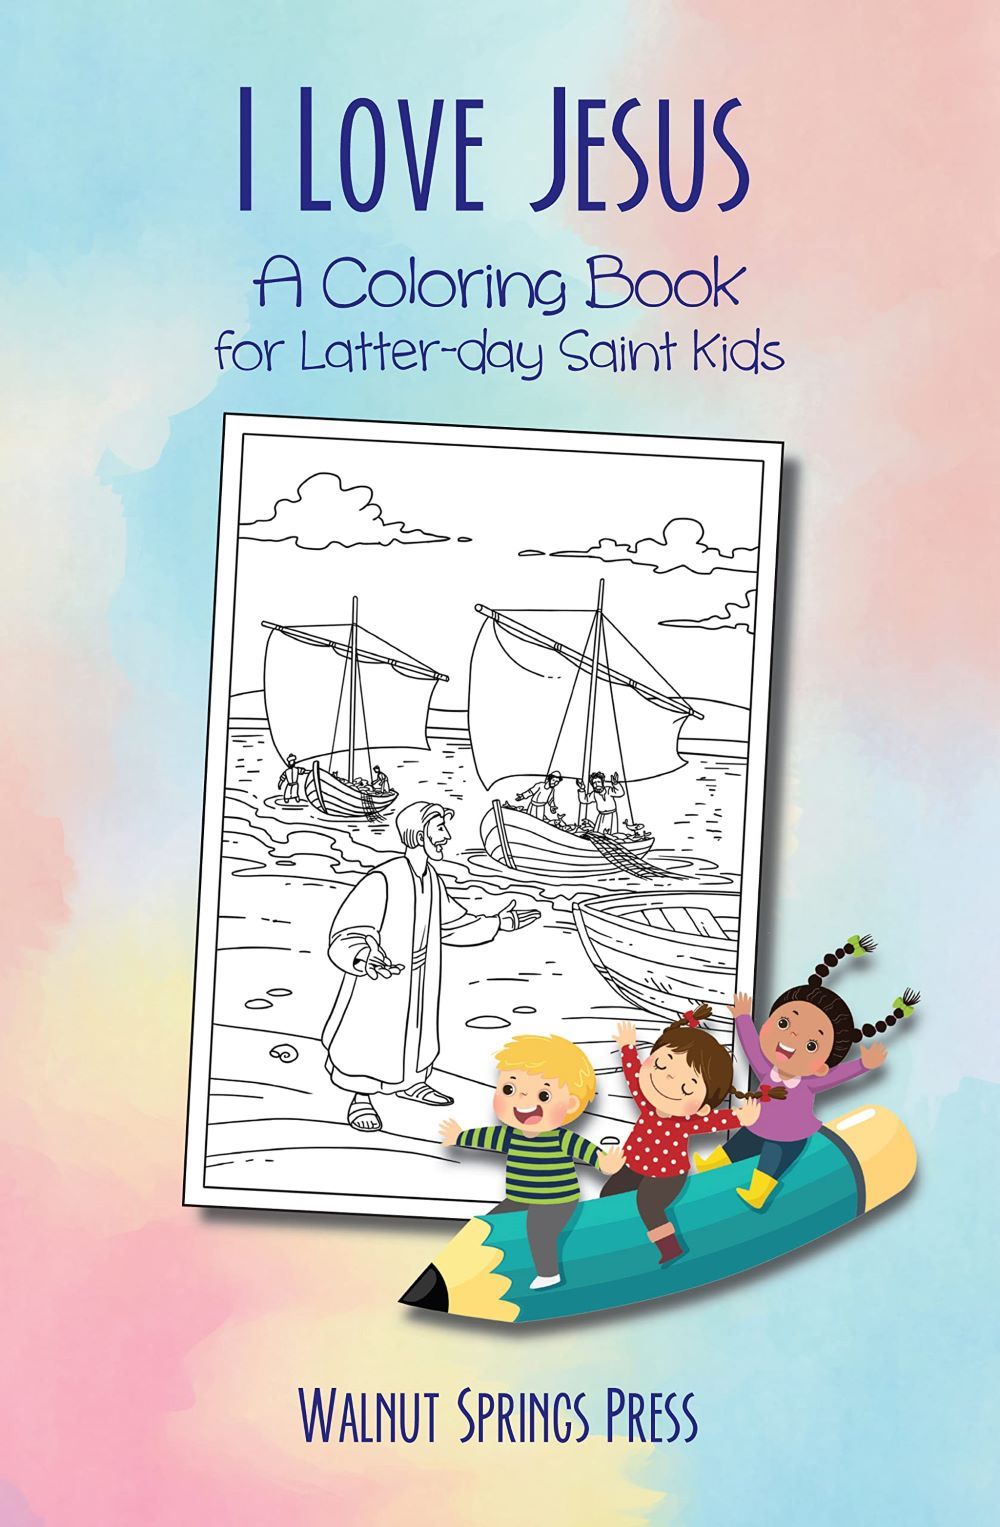 Adult Coloring Book For Latter-day Saints [Book]